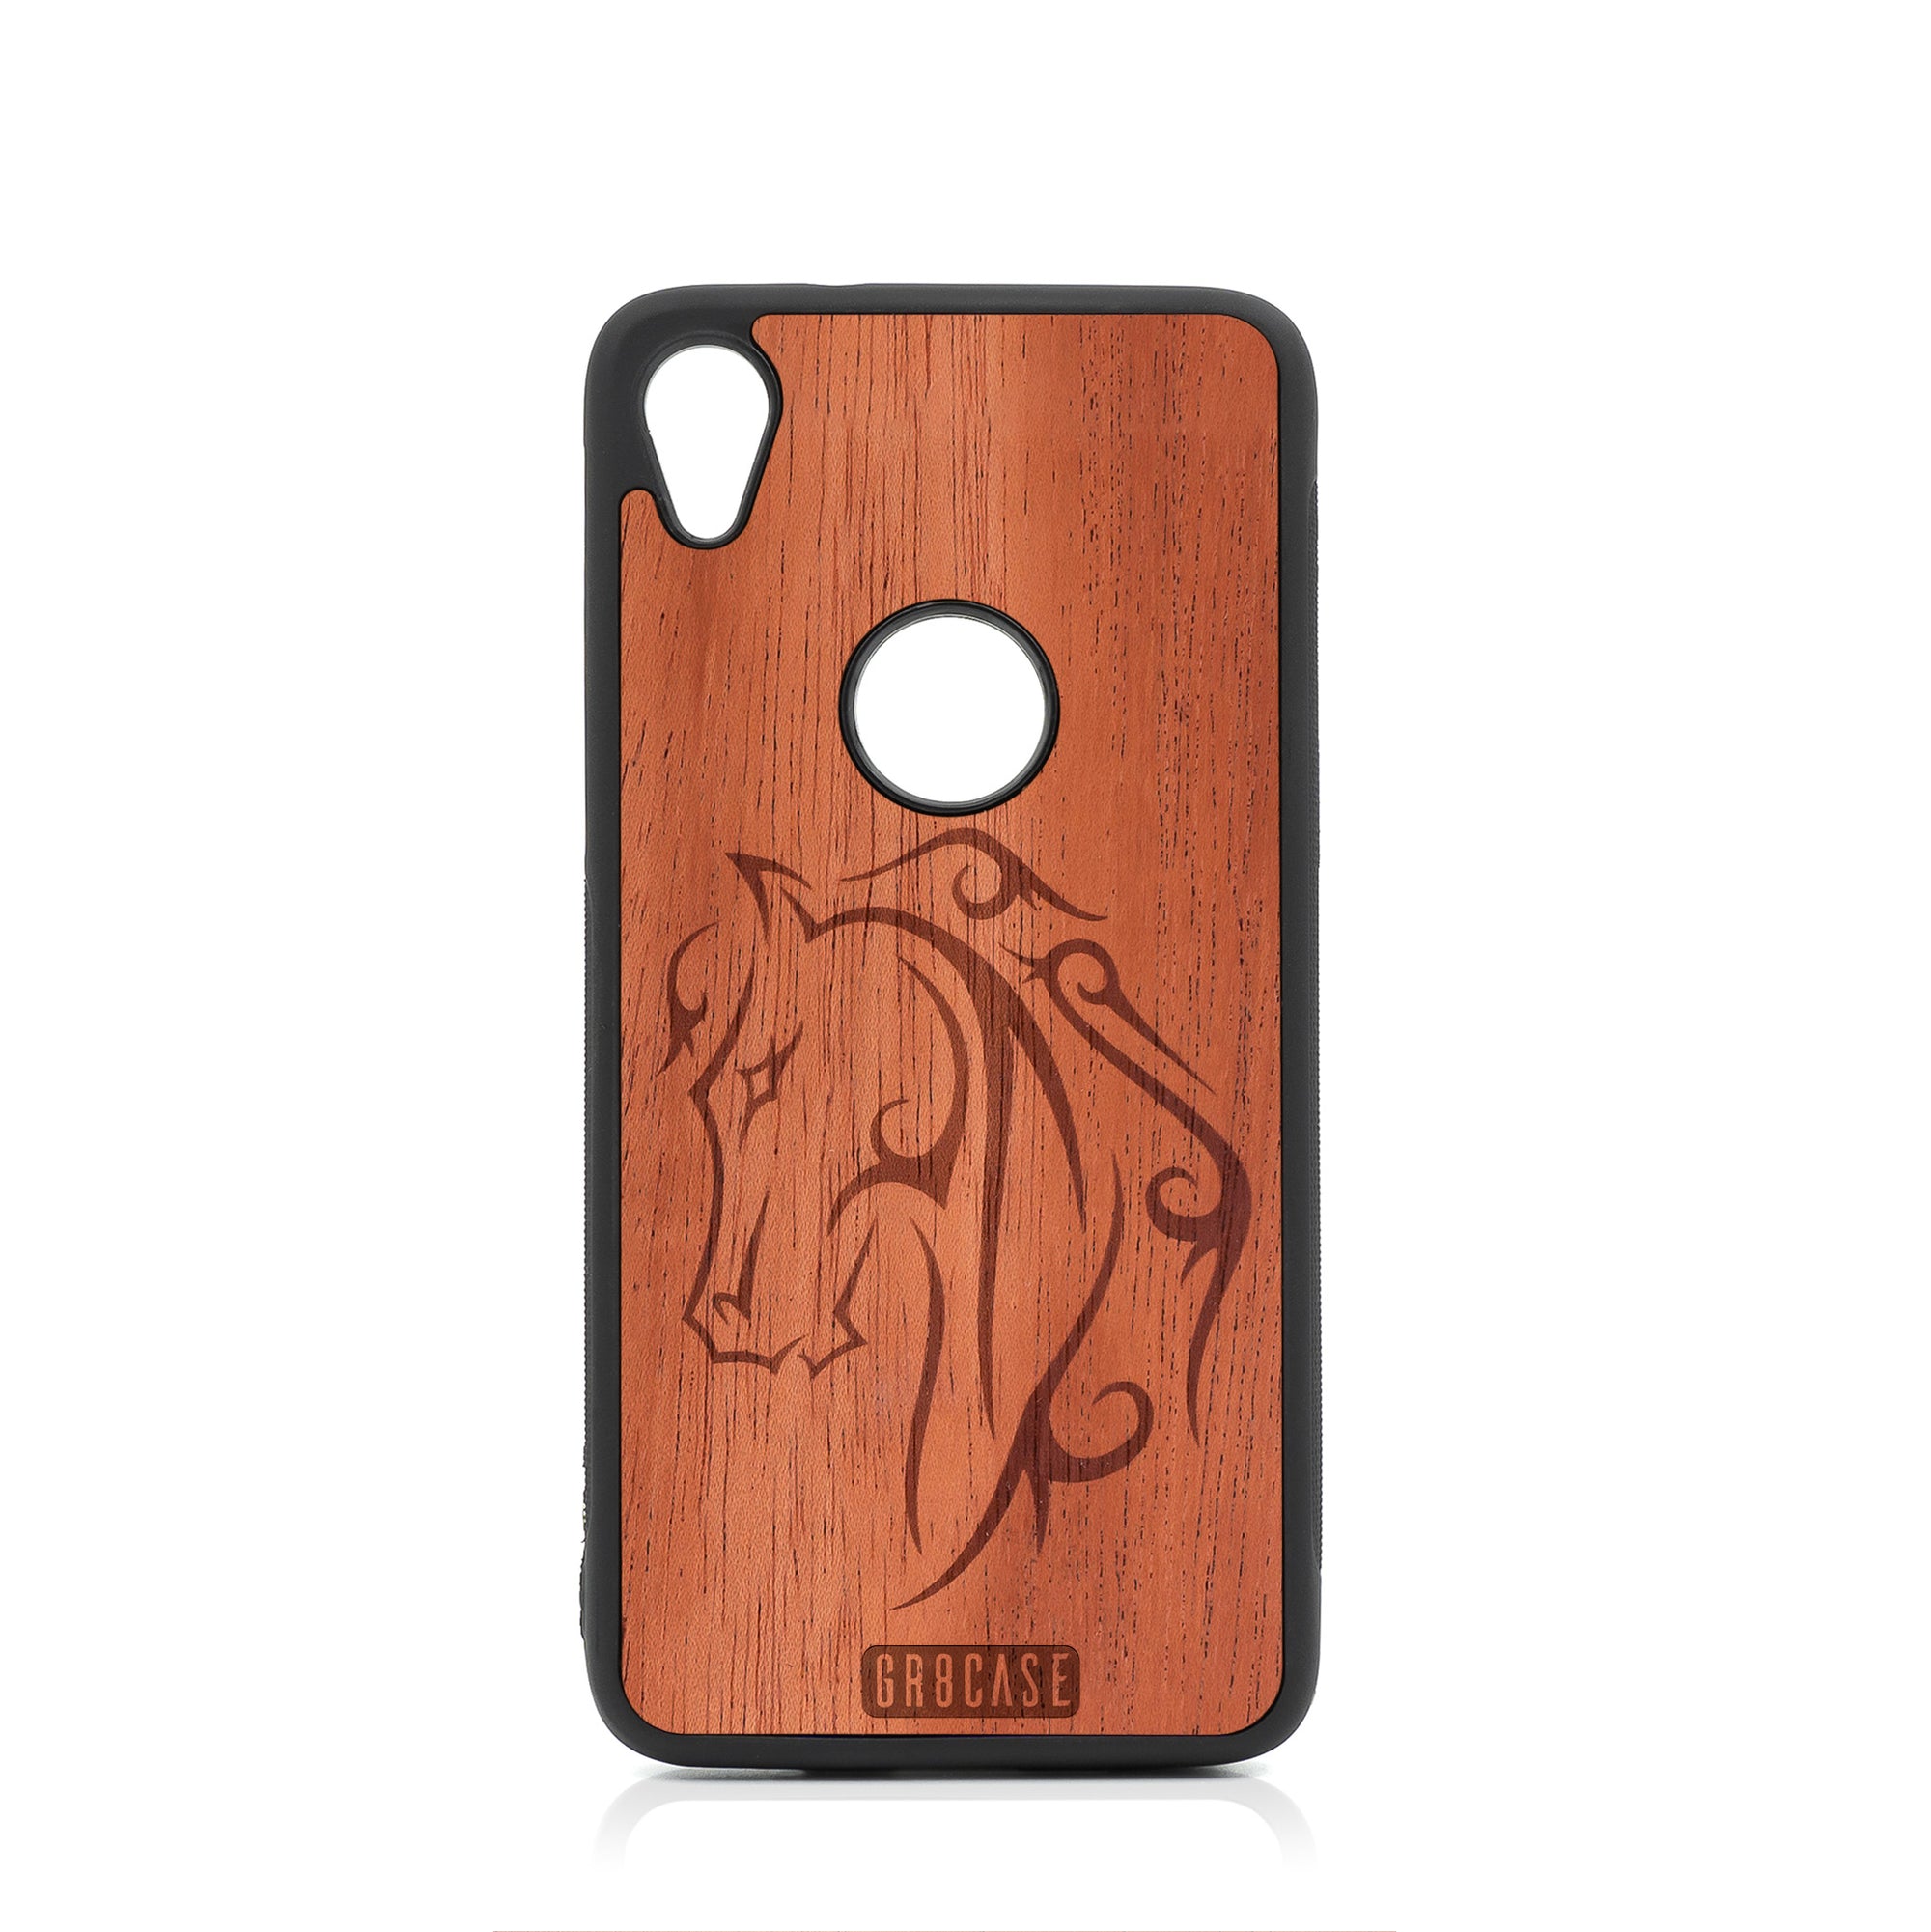 Horse Tattoo Design Wood Case For Moto E6 by GR8CASE